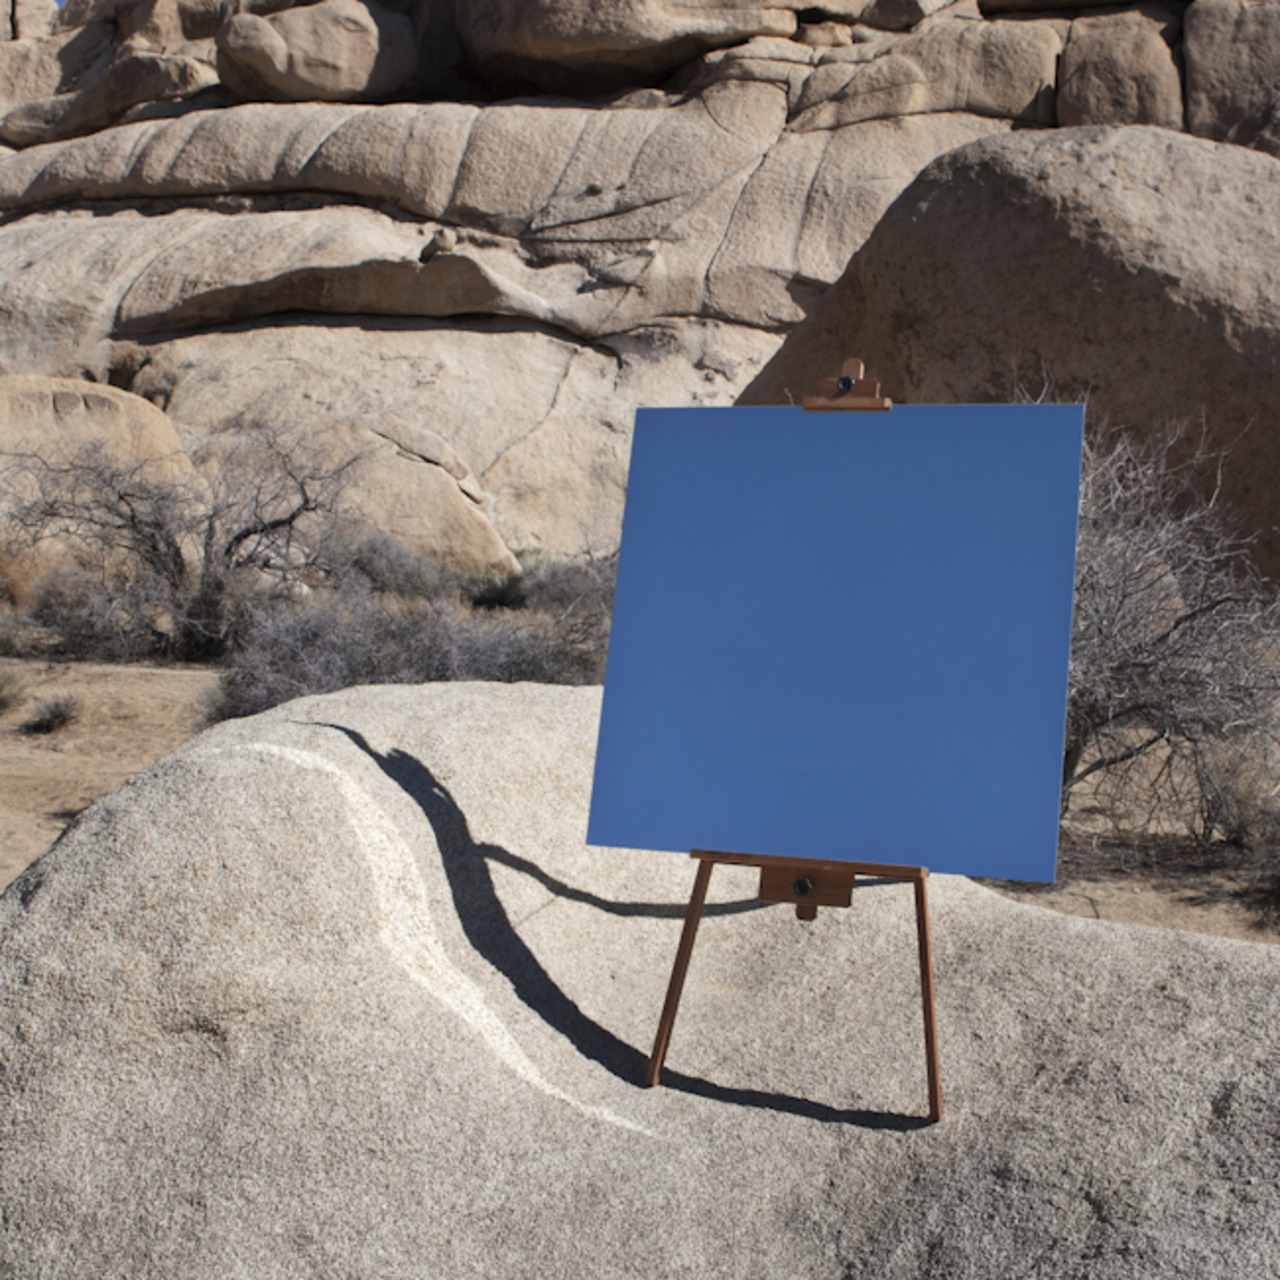 Photographs of Mirrors on Easels that Look Like Paintings in the Desert by Daniel